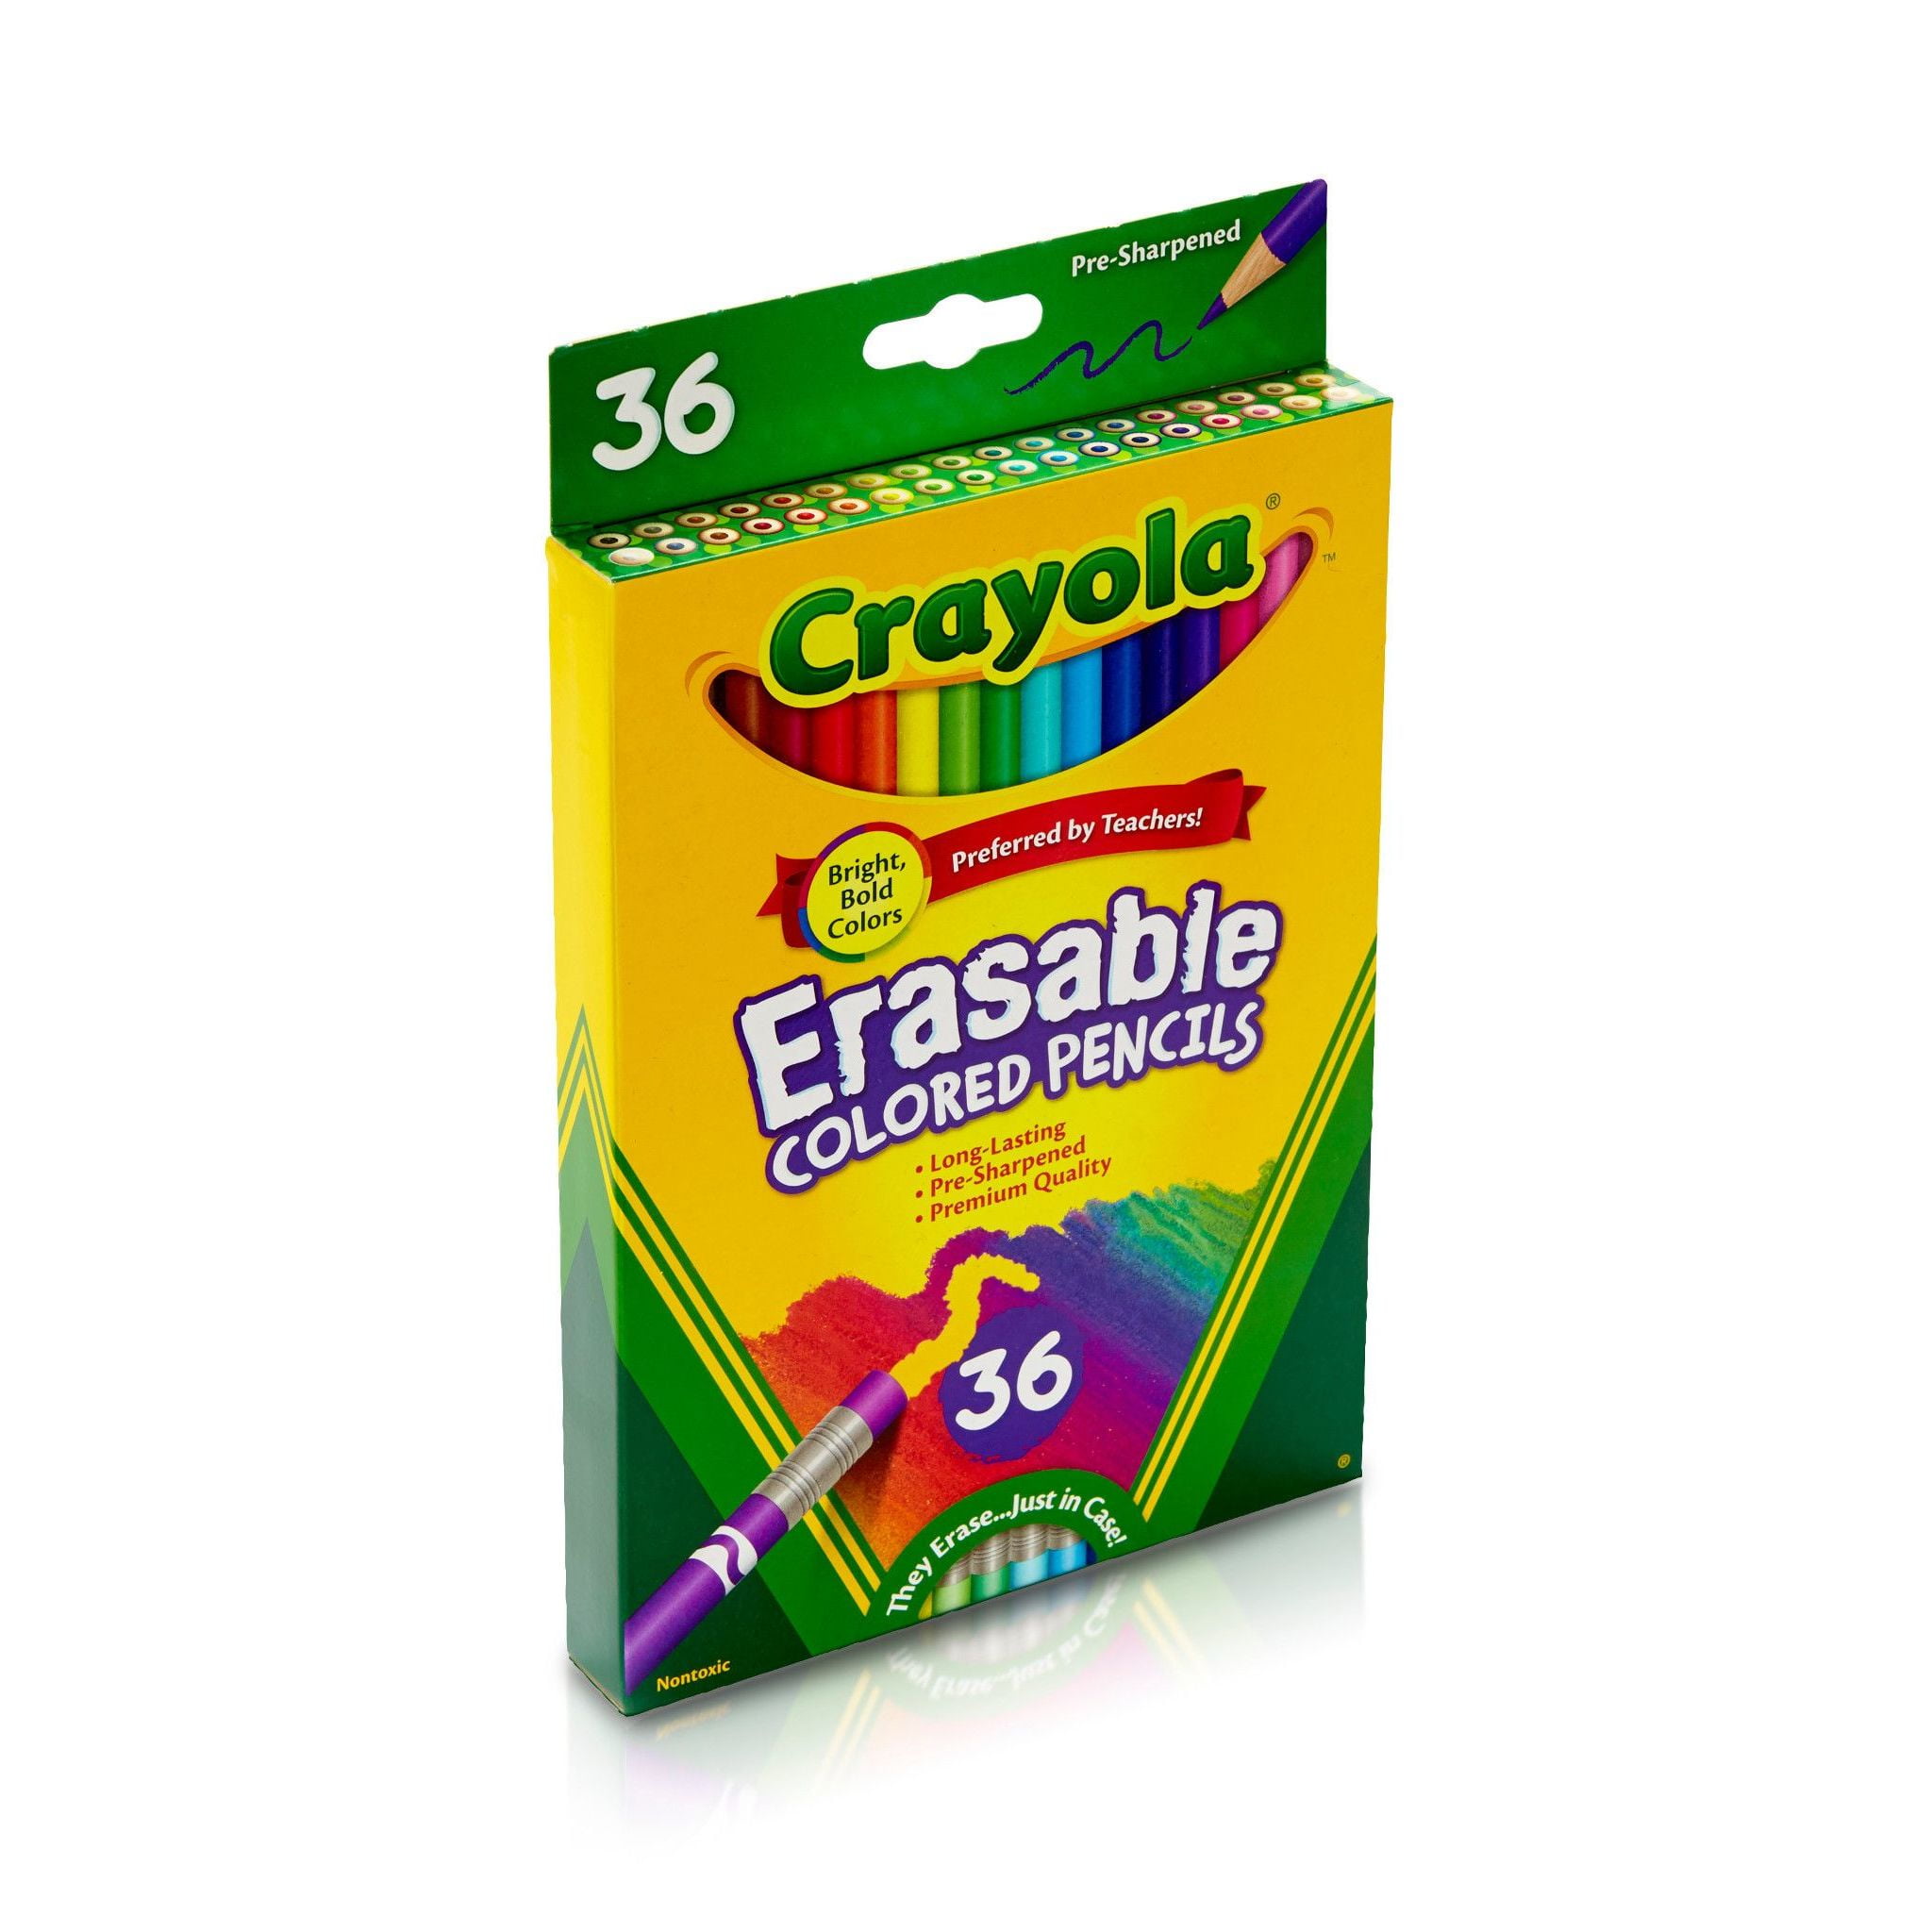 Crayola Dual-Ended Colored Pencils For Shading, 36 Count With Sharpener 